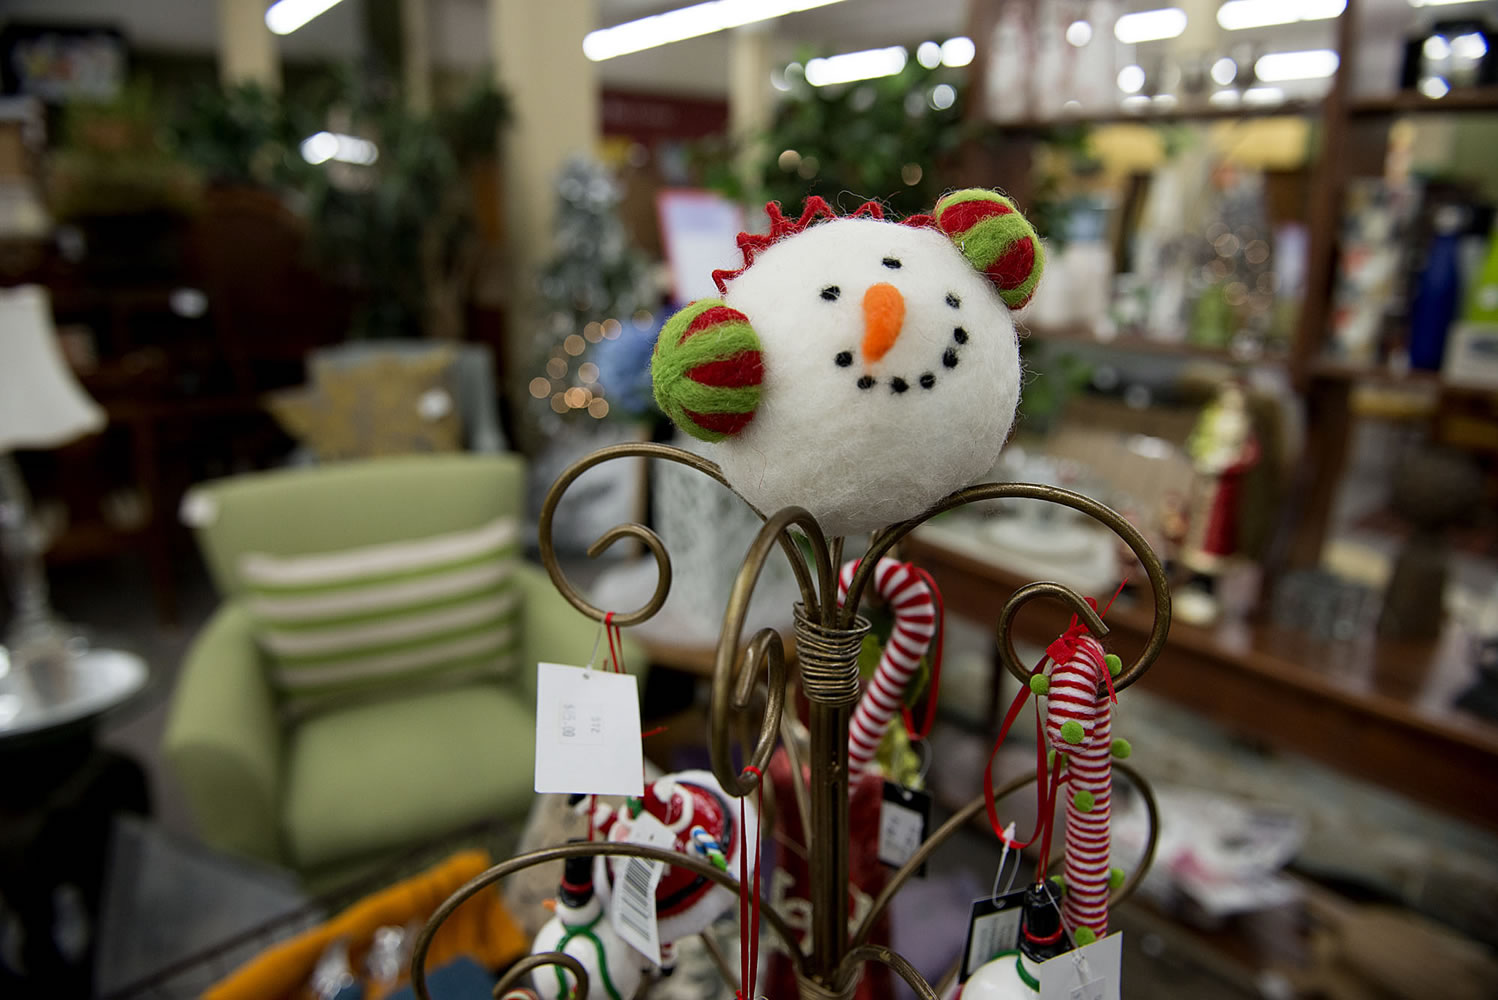 Holiday ornaments are among the gift ideas at Divine Consign, which donates a portion of proceeds to local charities.